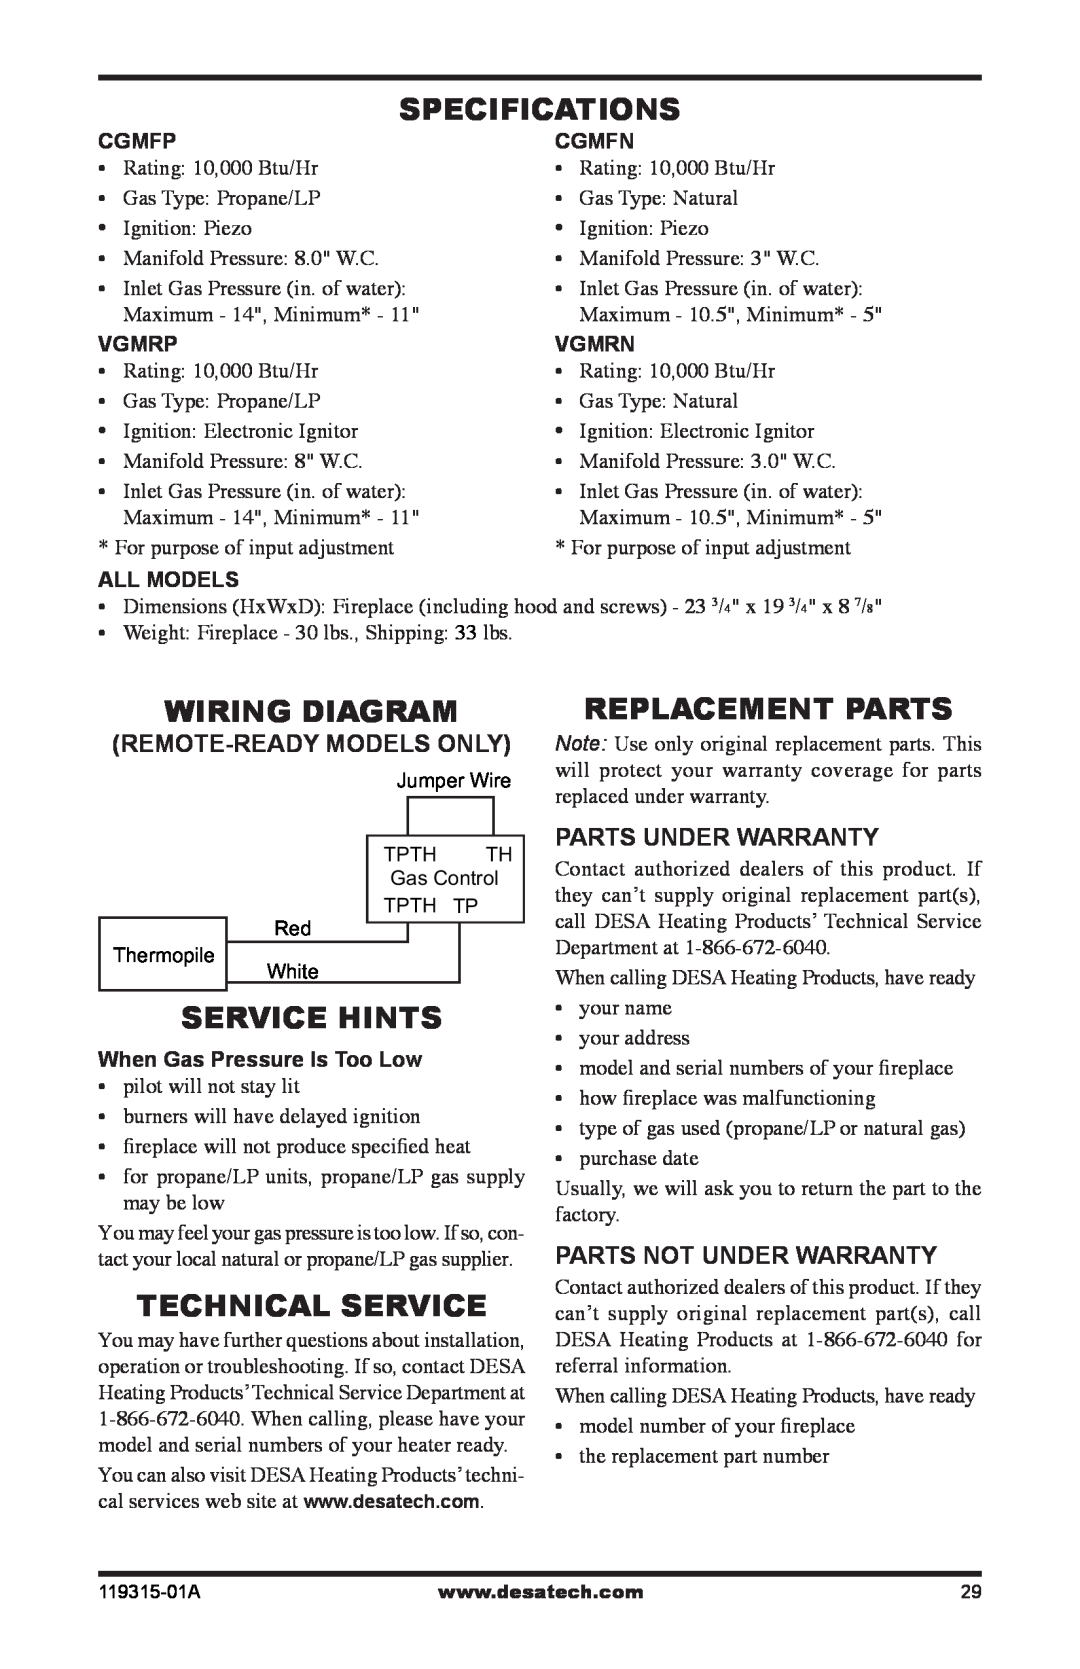 Desa CGMFP Specifications, Wiring Diagram, Replacement Parts, Service Hints, Technical Service, Remote-ReadyModels Only 